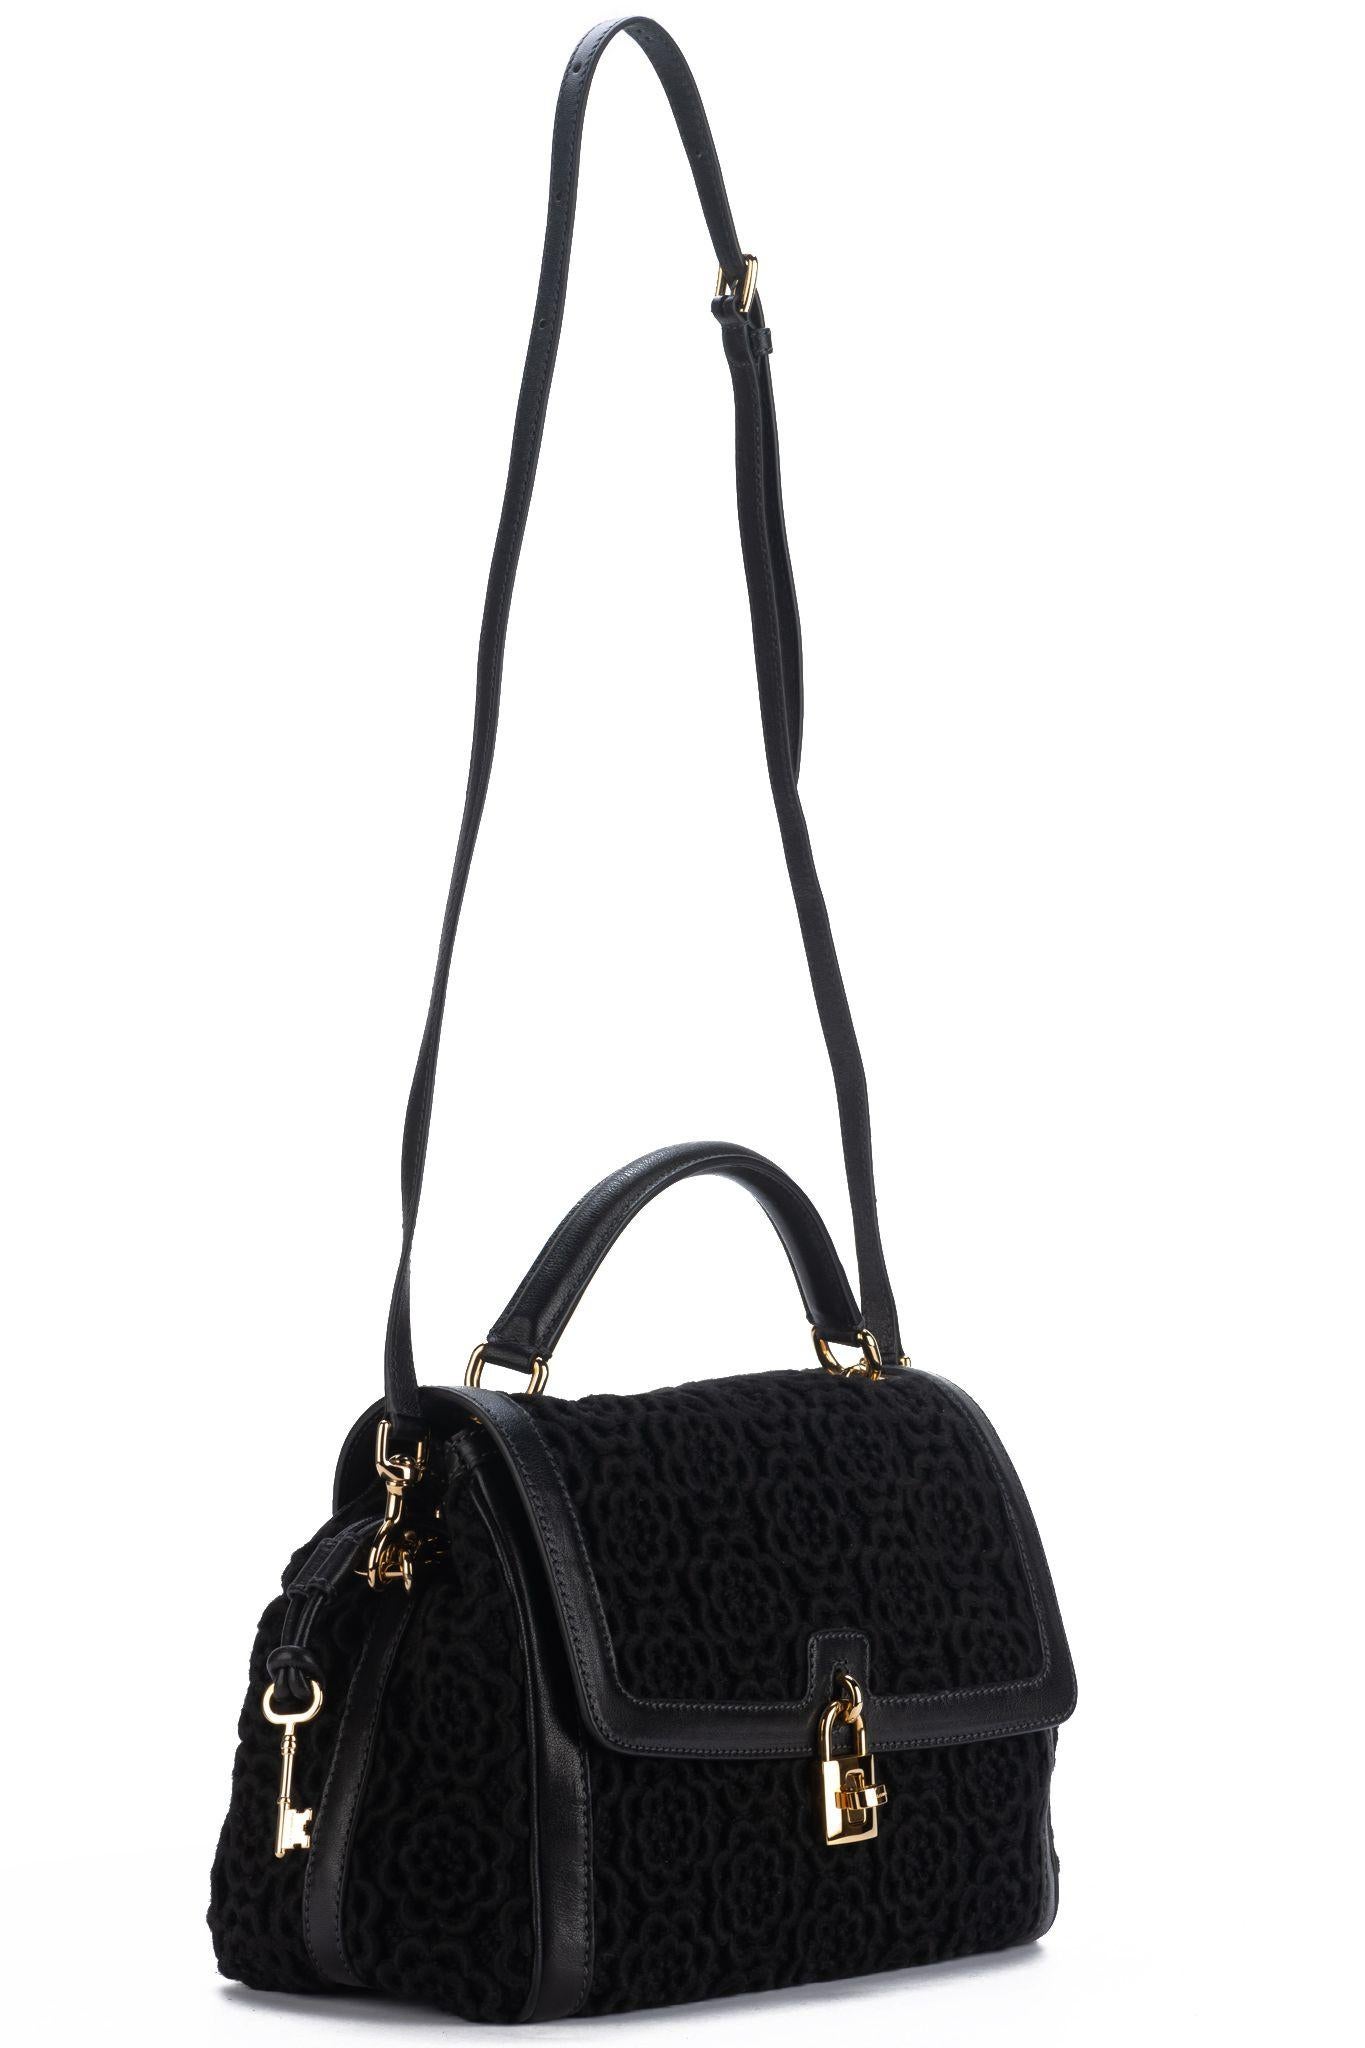 Dolce e Gabbana new with tag black macrame bag with handle and detachable strap. Handle drop 5.5”, shoulder drop 22”. Comes with tag, ID card, booklet and original dust cover.
